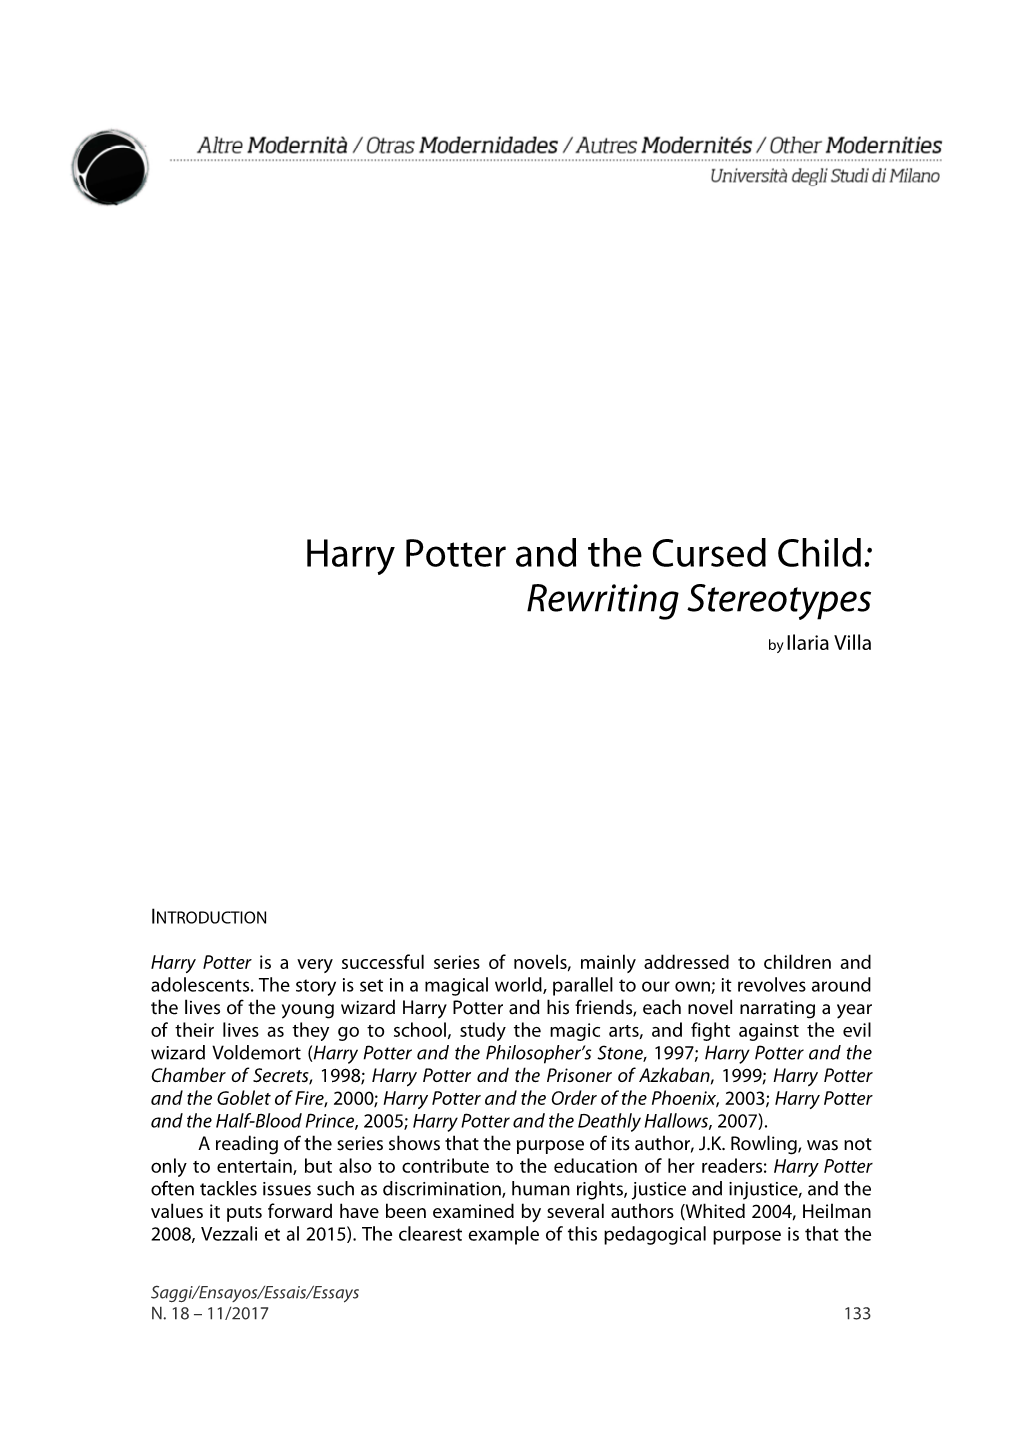 Harry Potter and the Cursed Child : Rewriting Stereotypes